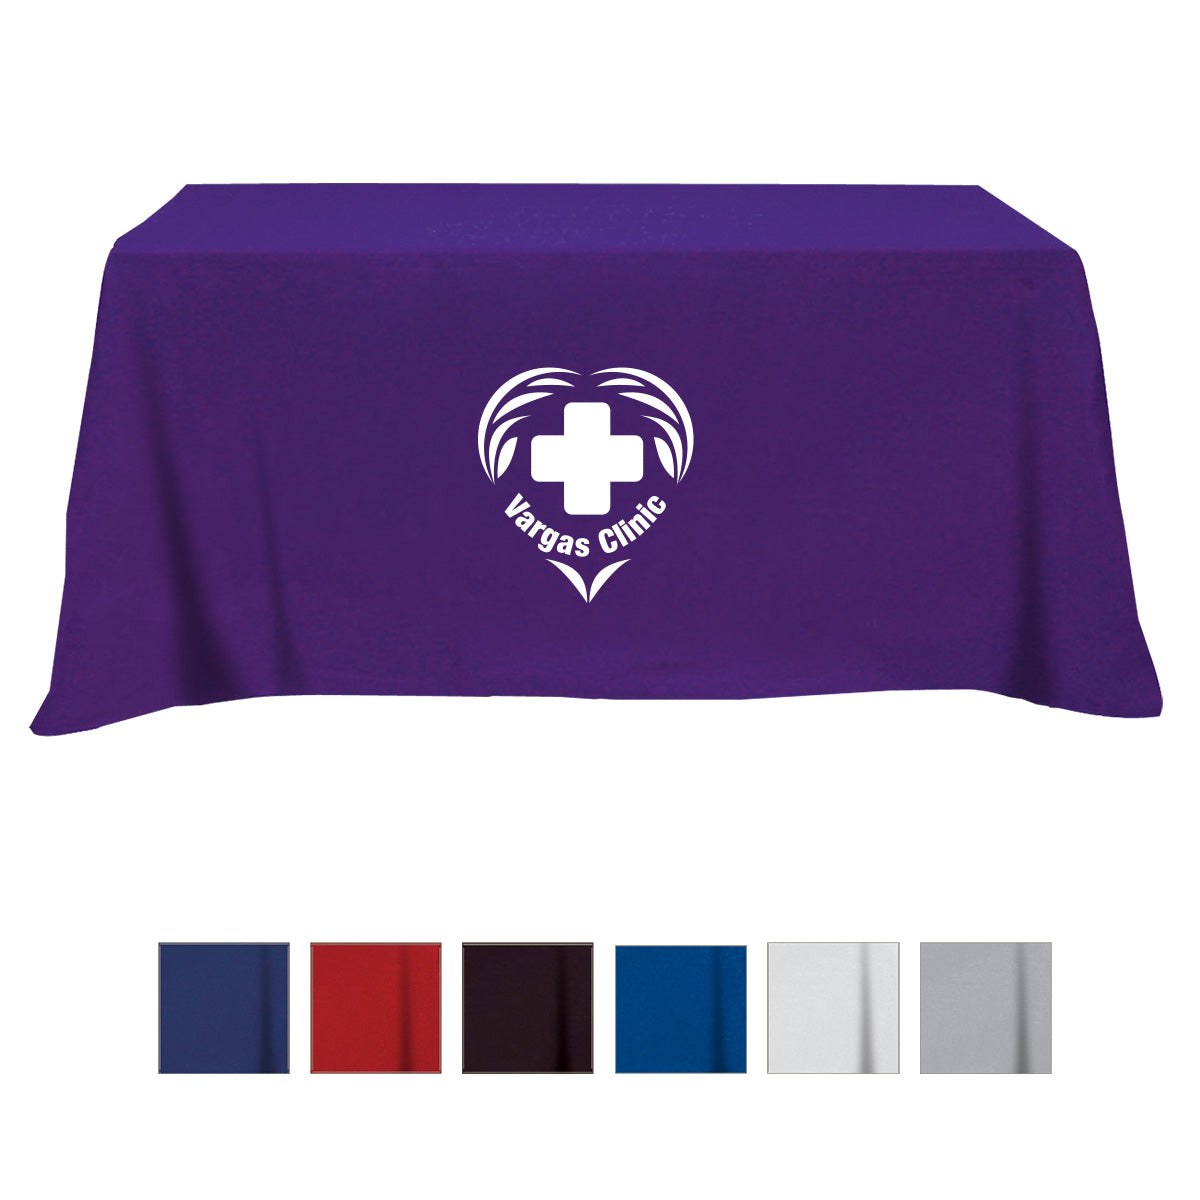 2   FLAT POLY/COTTON 4-SIDED TABLE COVER - FITS 6' STANDARD TABLE